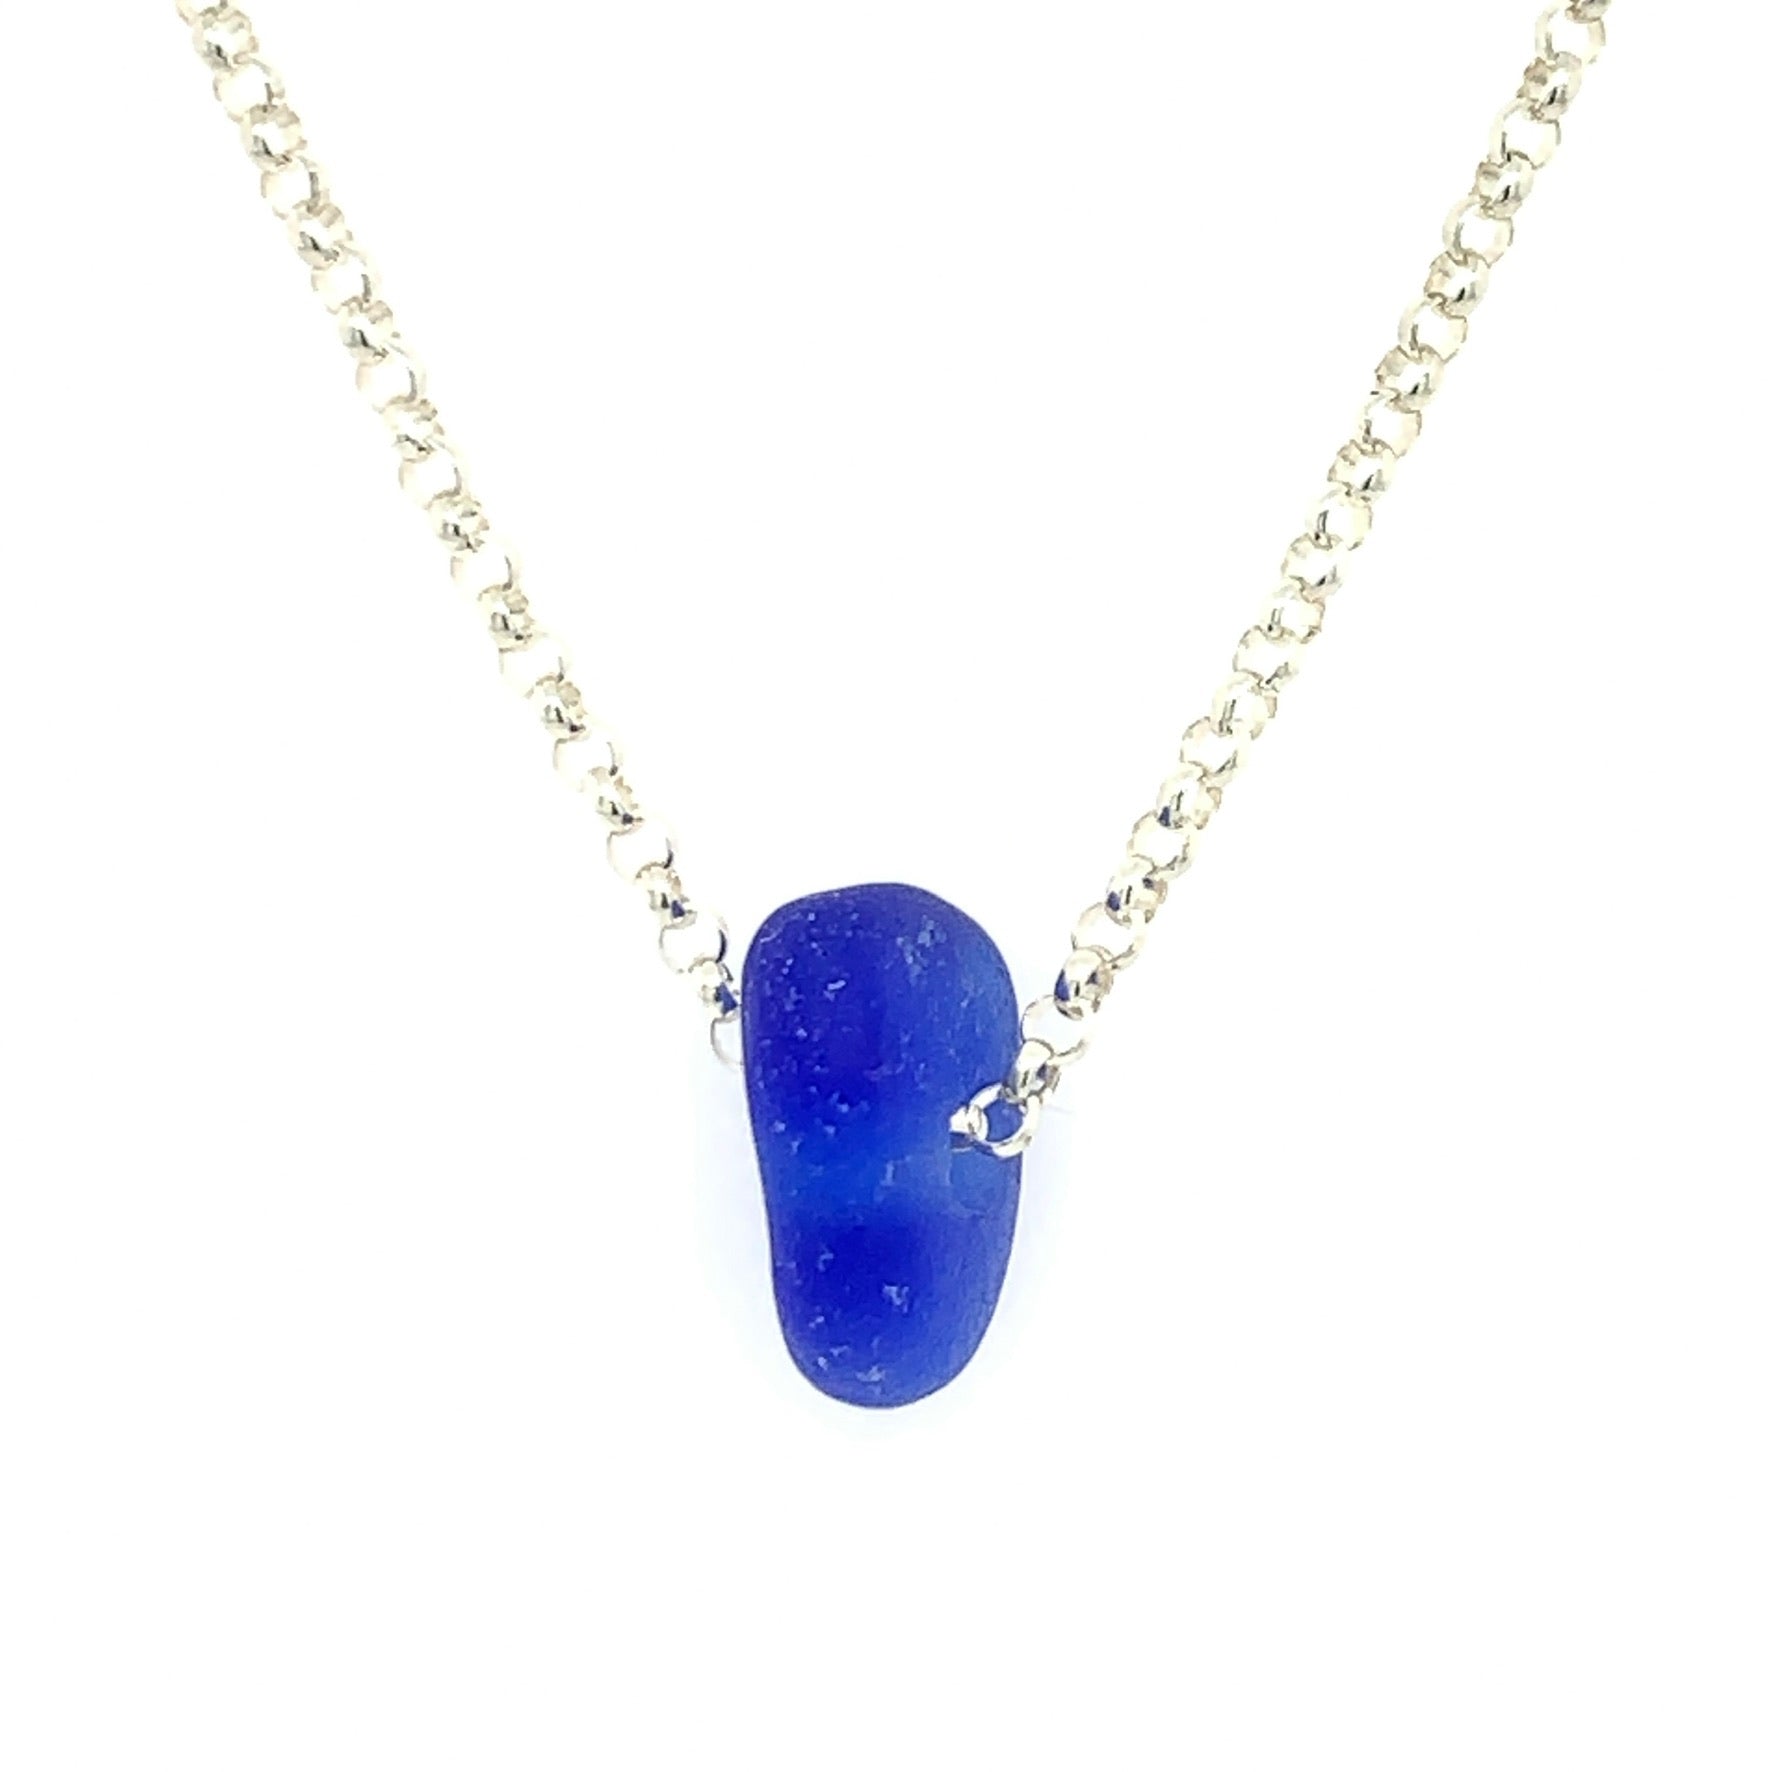 RARE PERFECT Cobalt Blue Sea Glass Necklace with Sterling Sea Turtle Charm  and 18